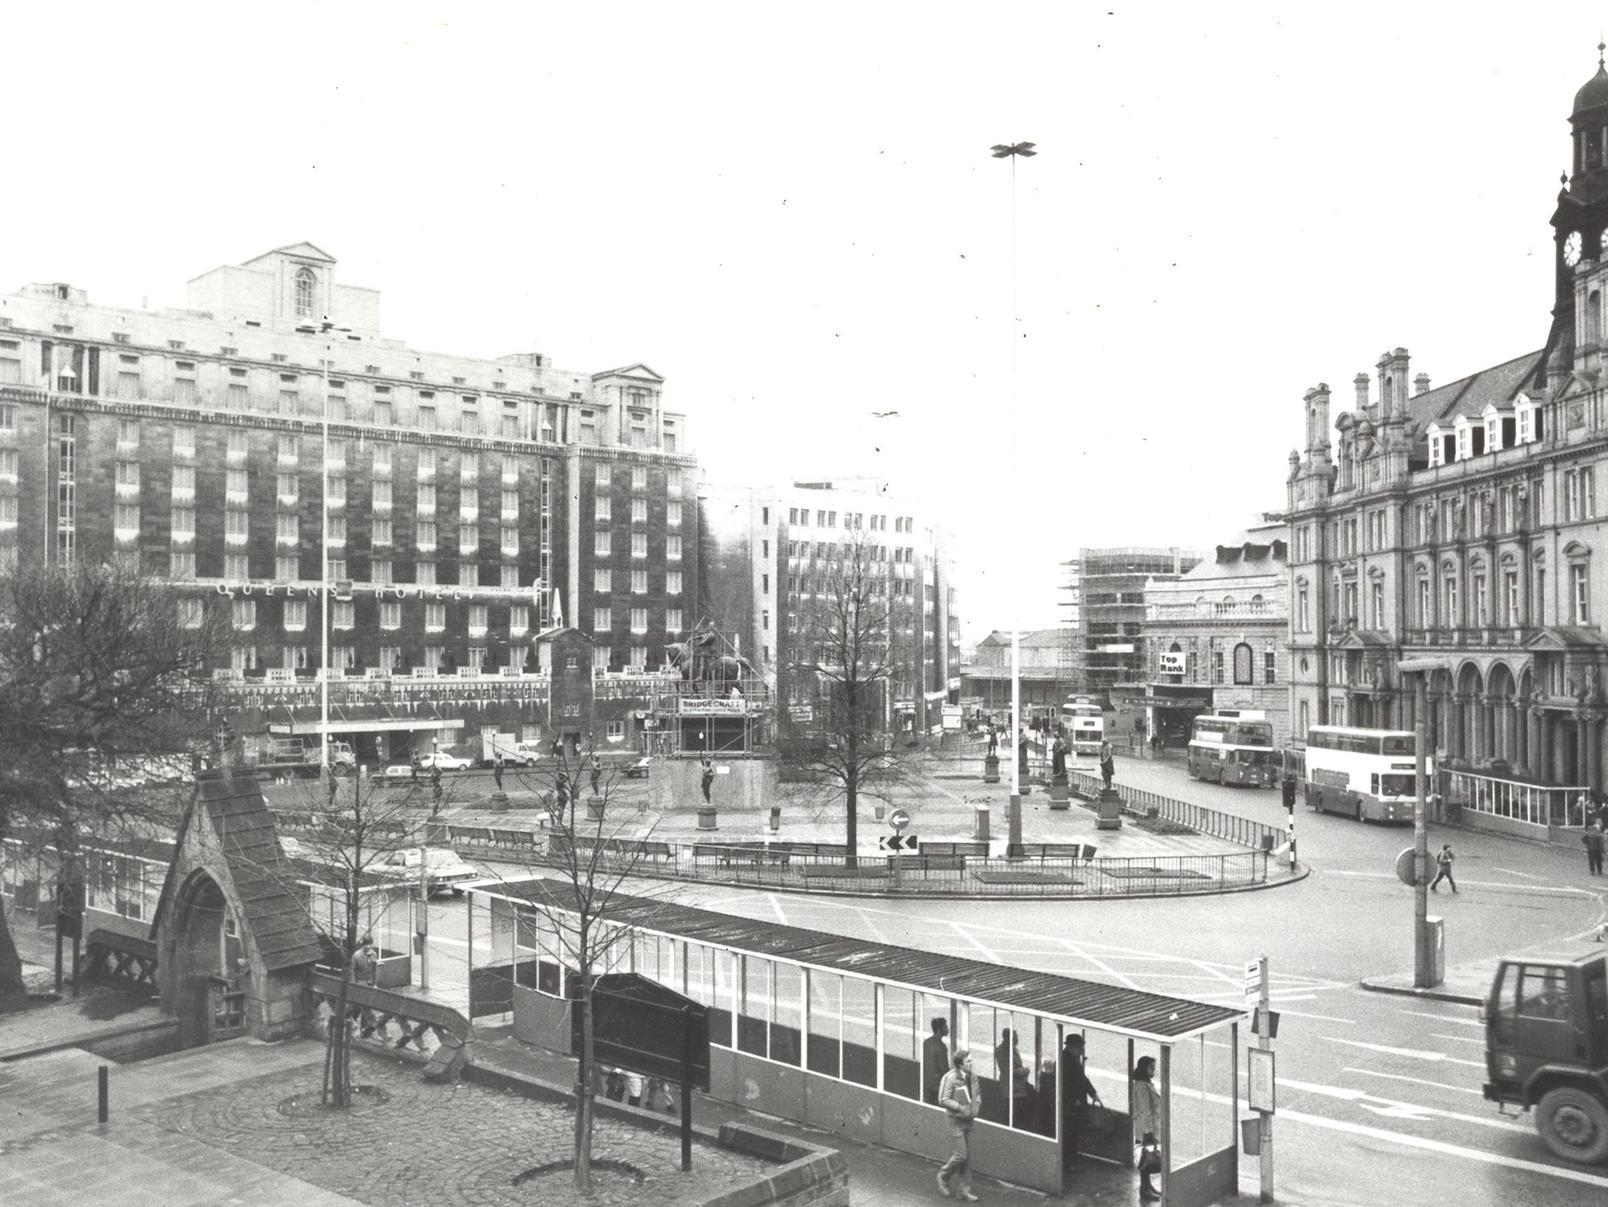 A view of City Square in the early 1980s.